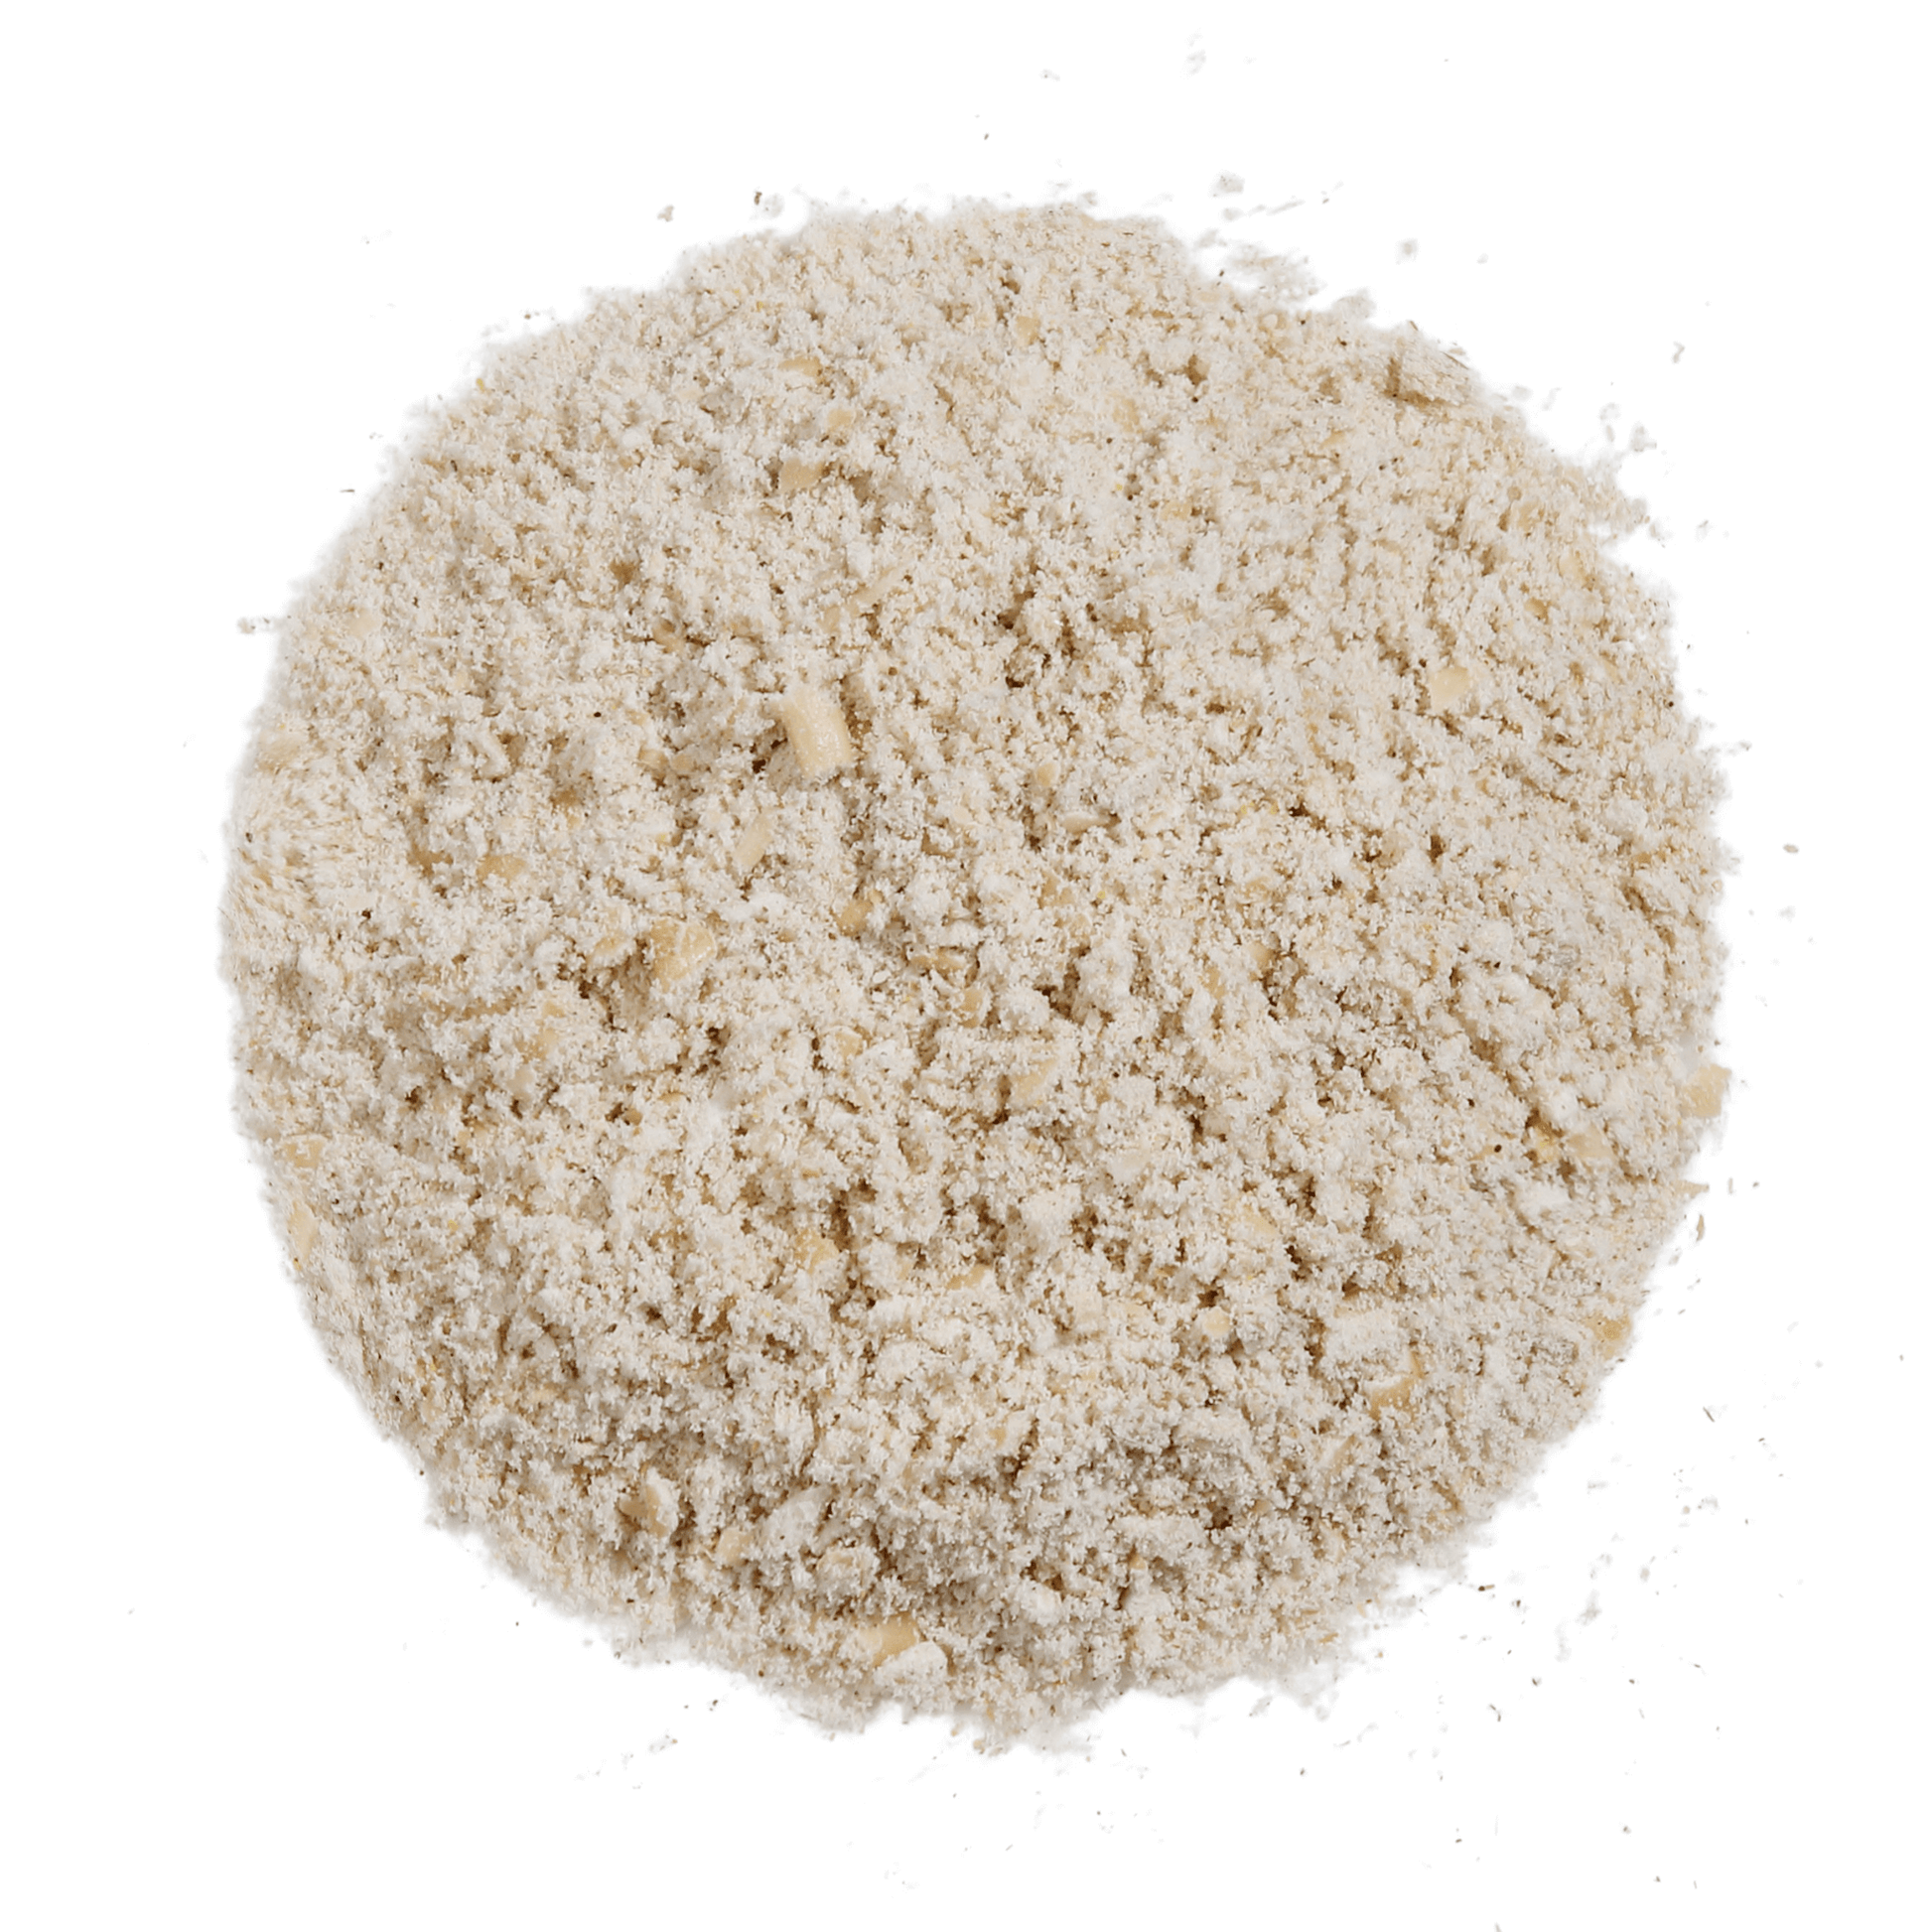 My Soft Grain Scrub is a natural physical exfoliator that deeply cleanses the pores, yet gentle enough for a sensitive skin.